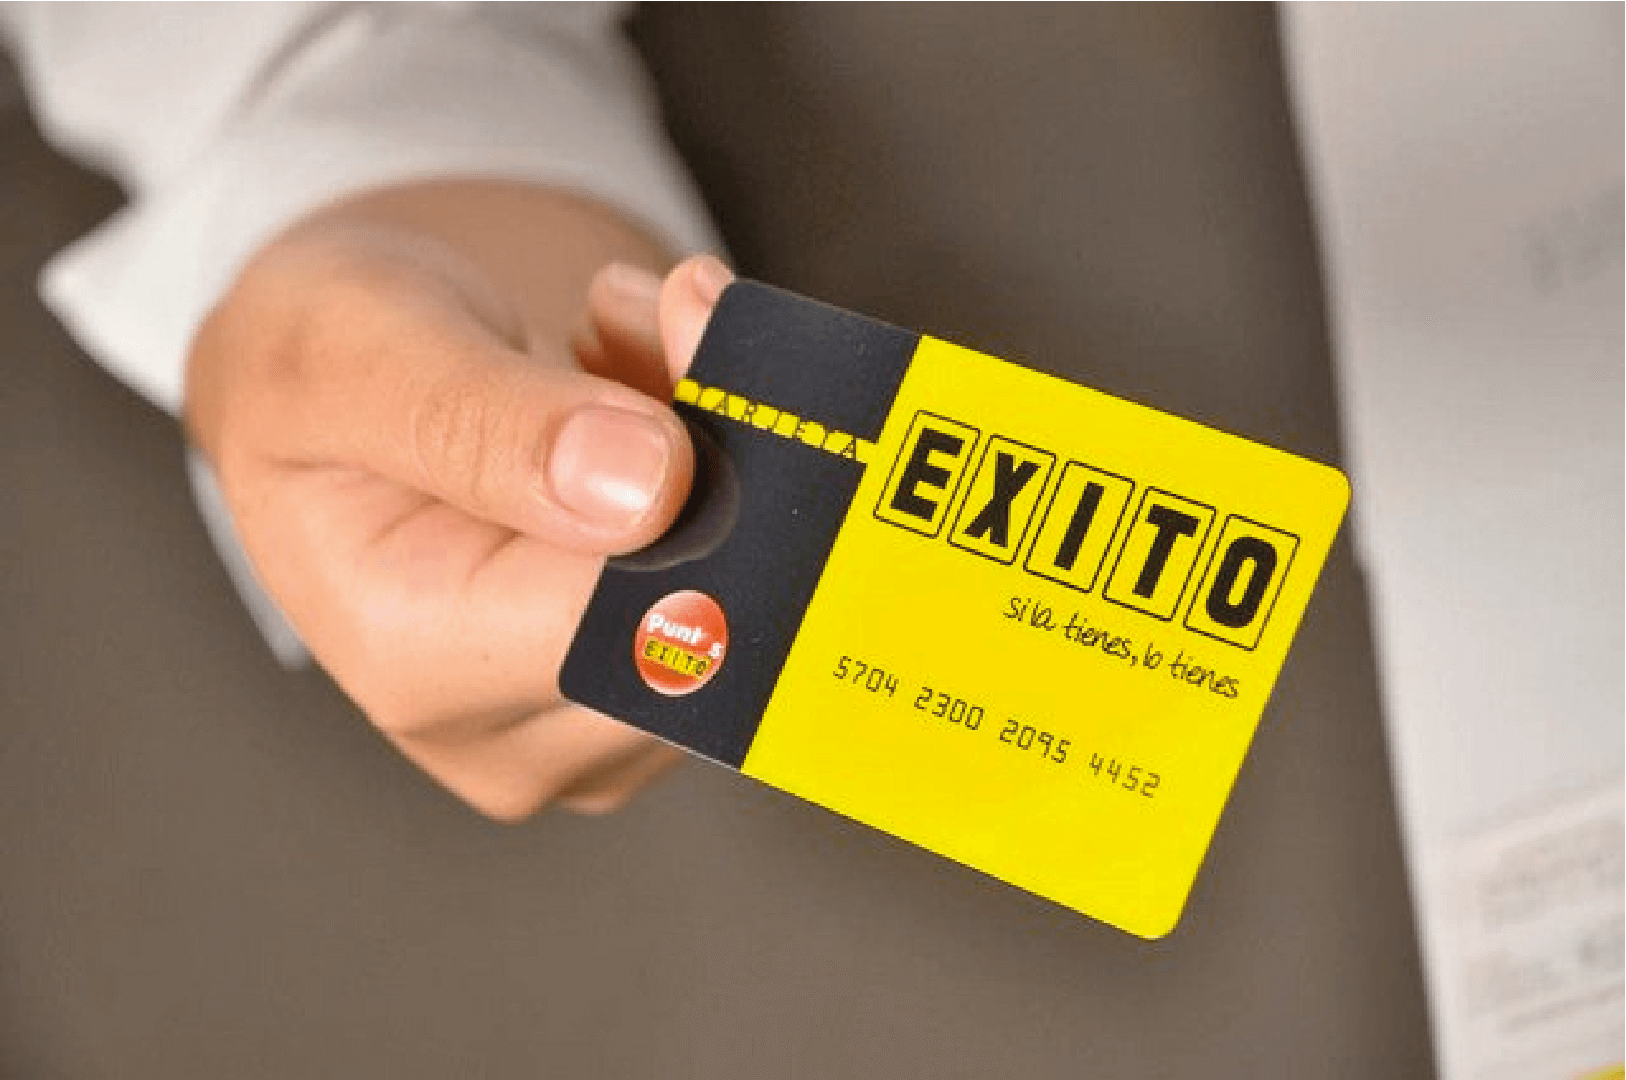 Estate Business and Éxito Card 